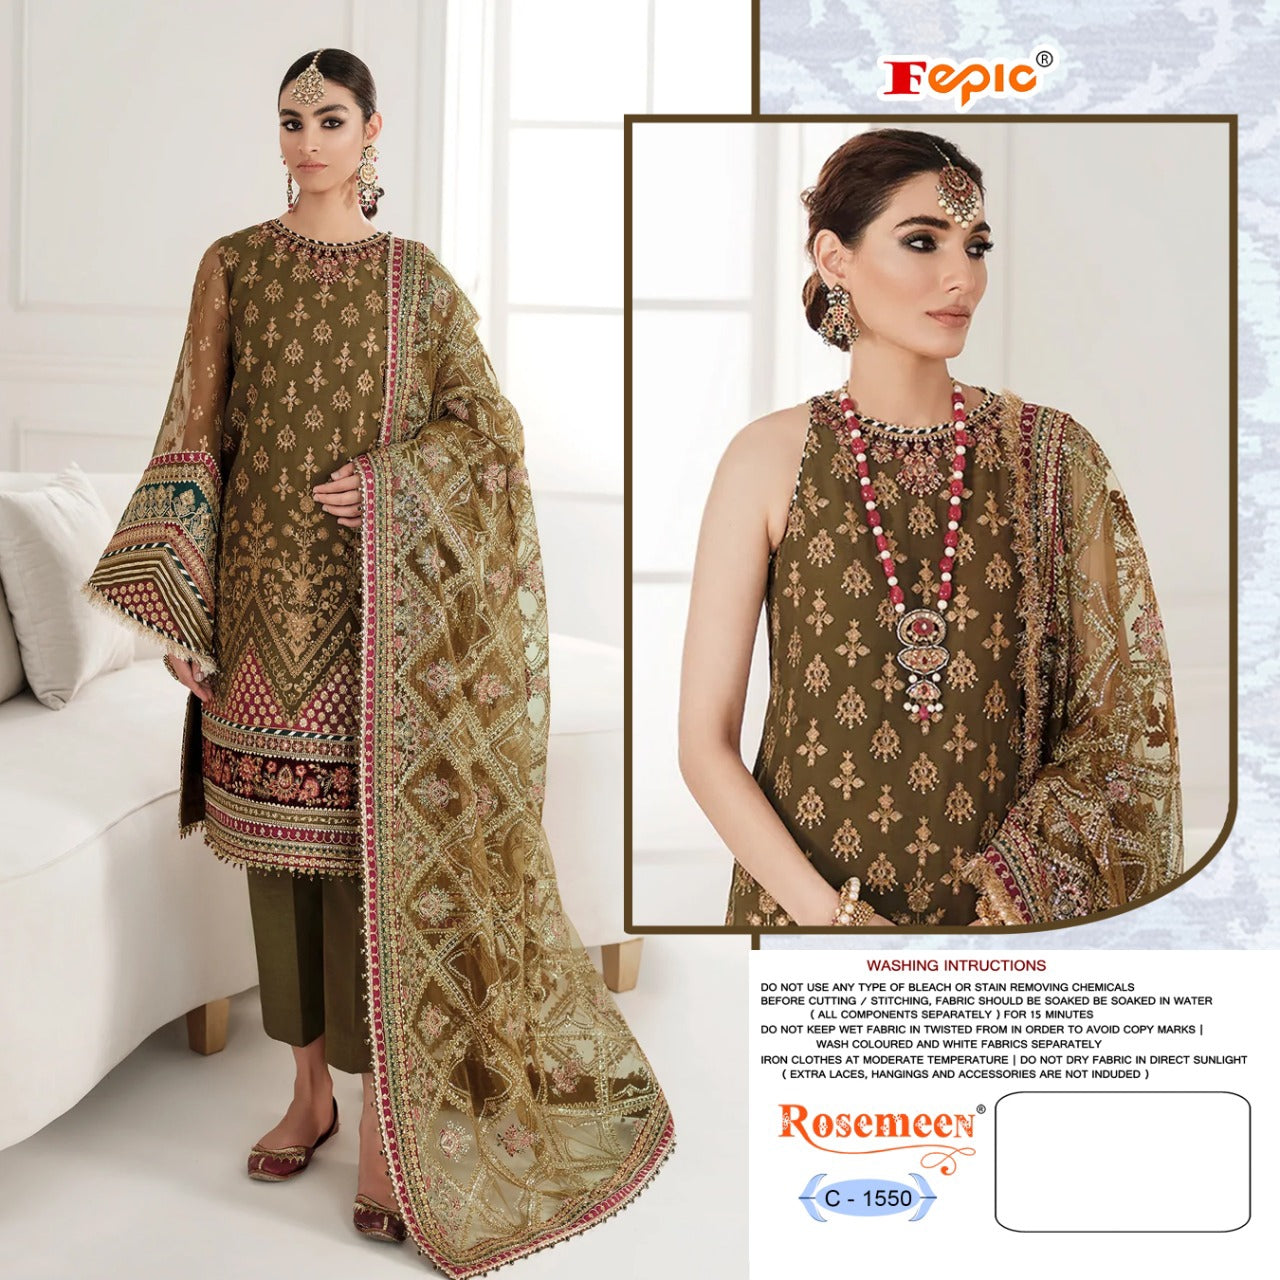 FEPIC ROSEMEEN D.NO-C 1550 DESIGNER SUIT Anant Tex Exports Private Limited